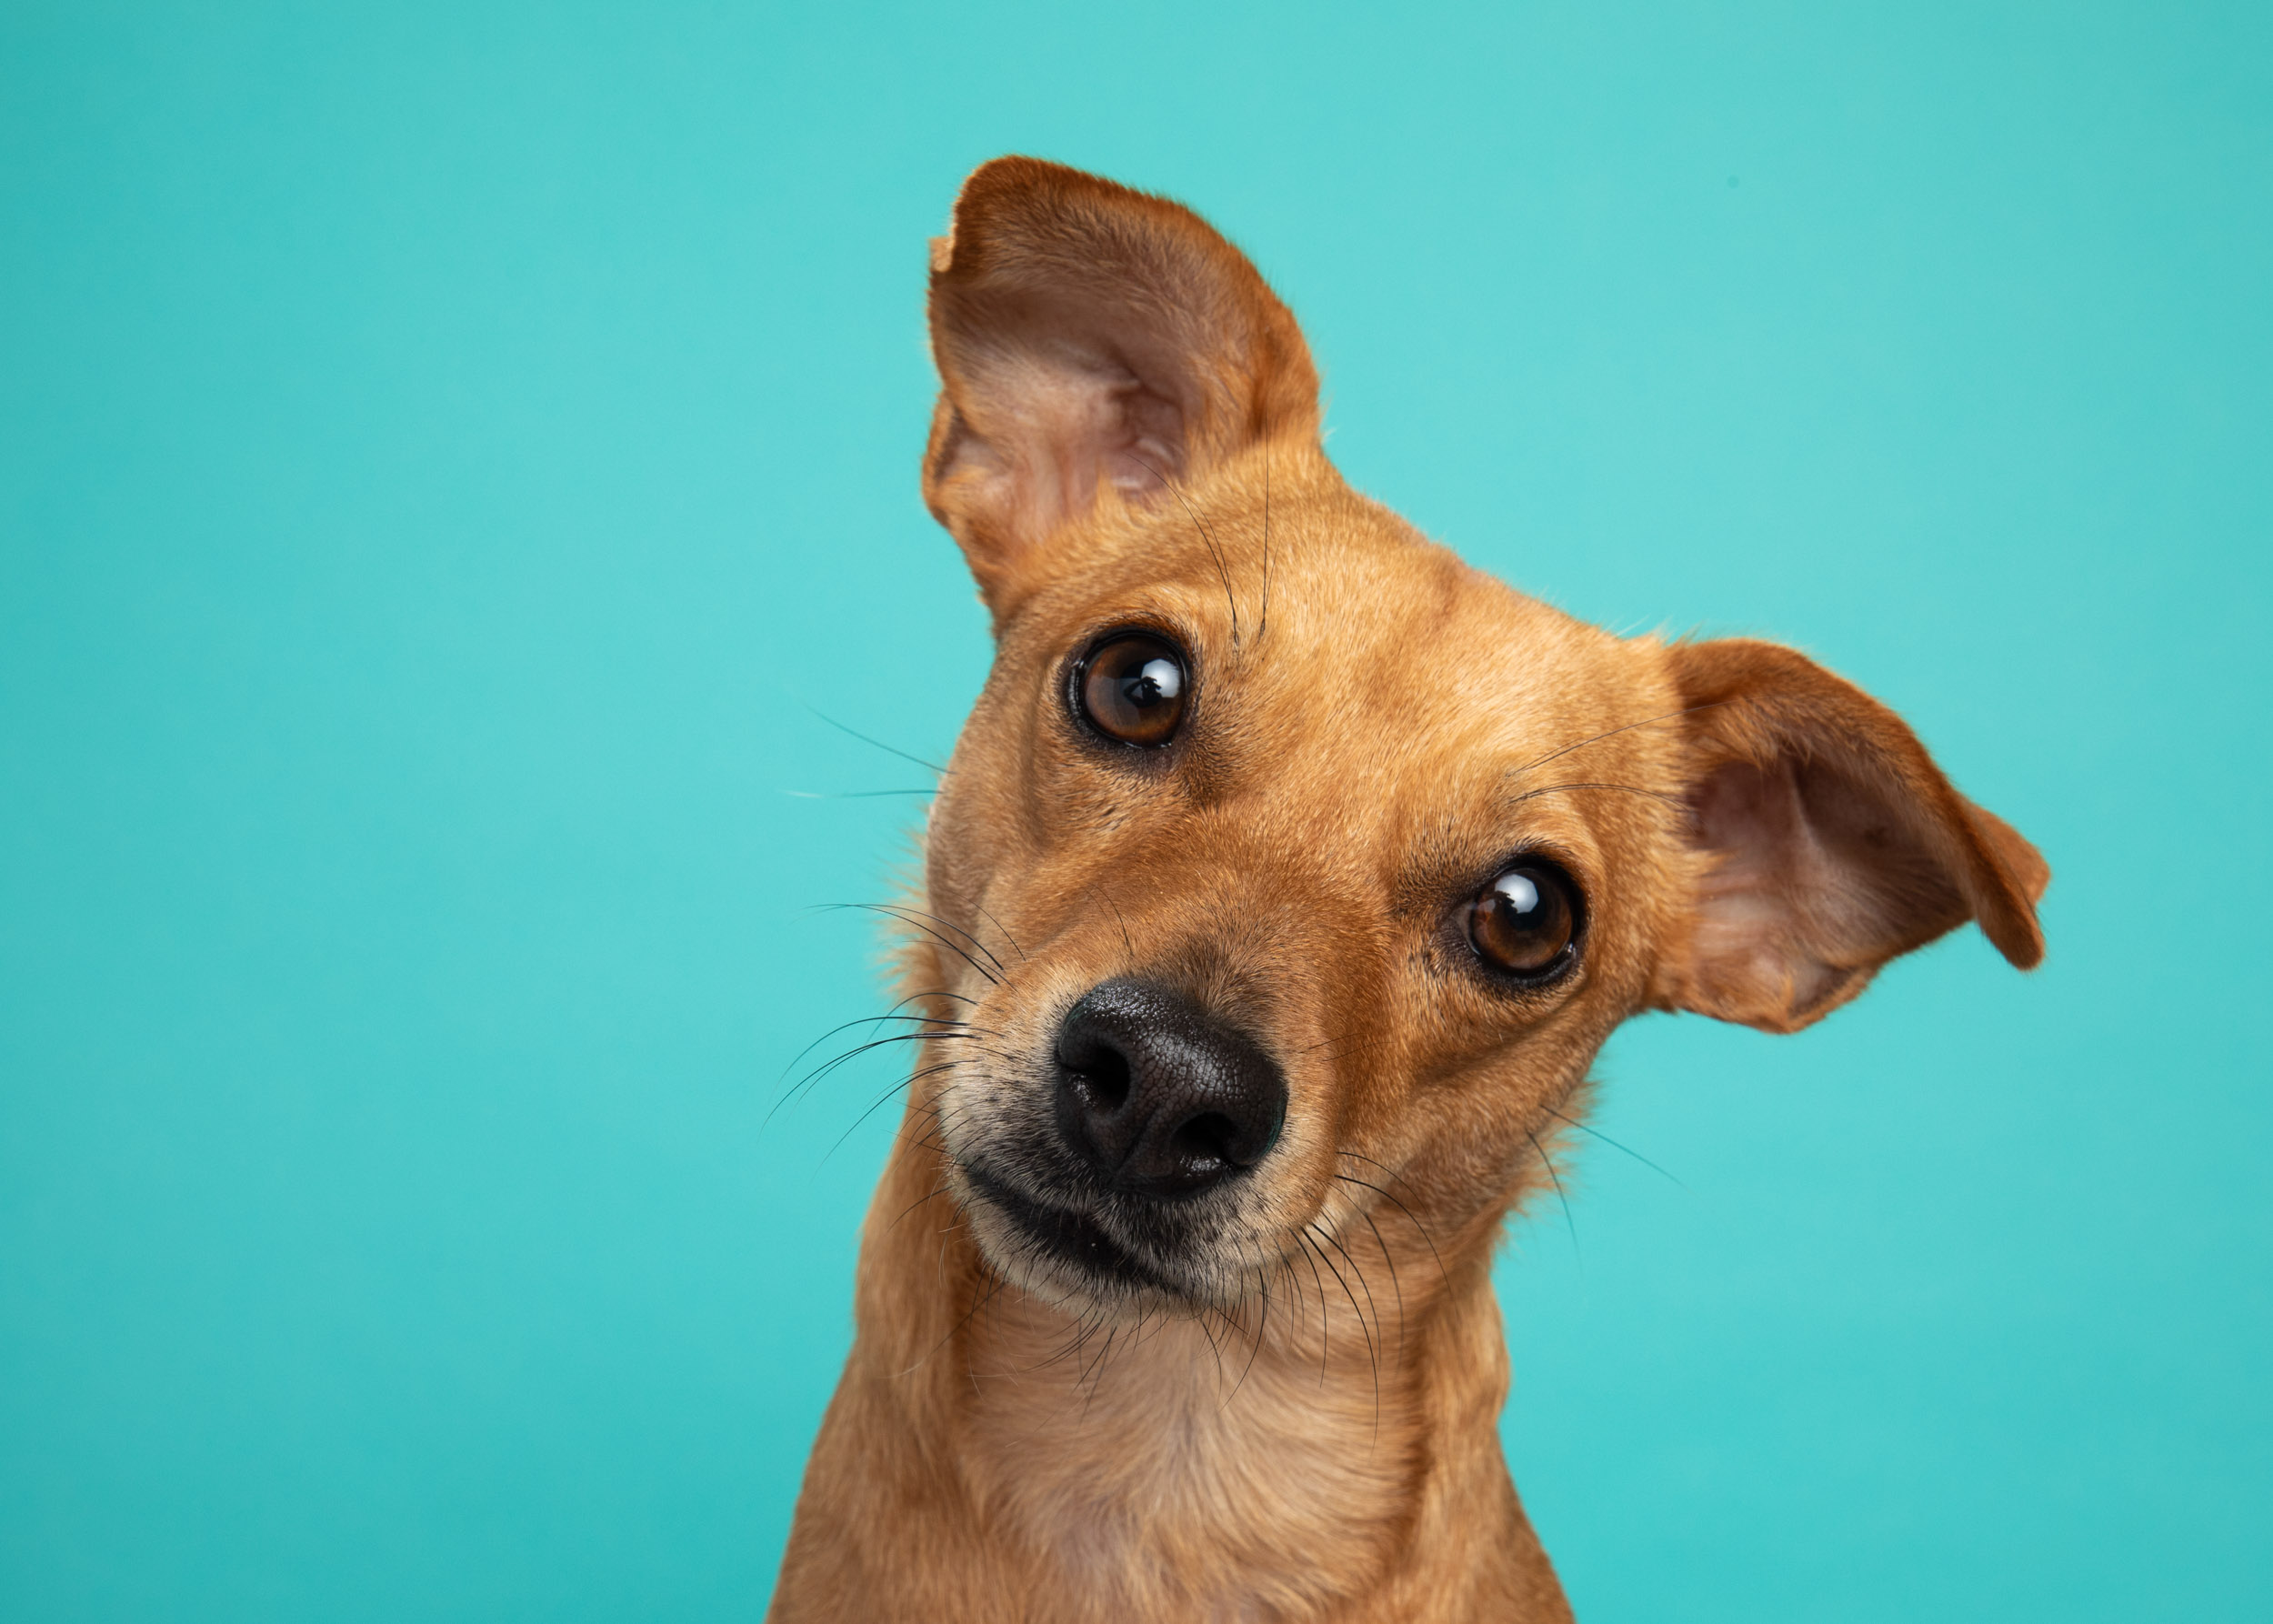 Dog Studio Photography | Red Chihuahua Mix Tilting Head by Mark Rogers